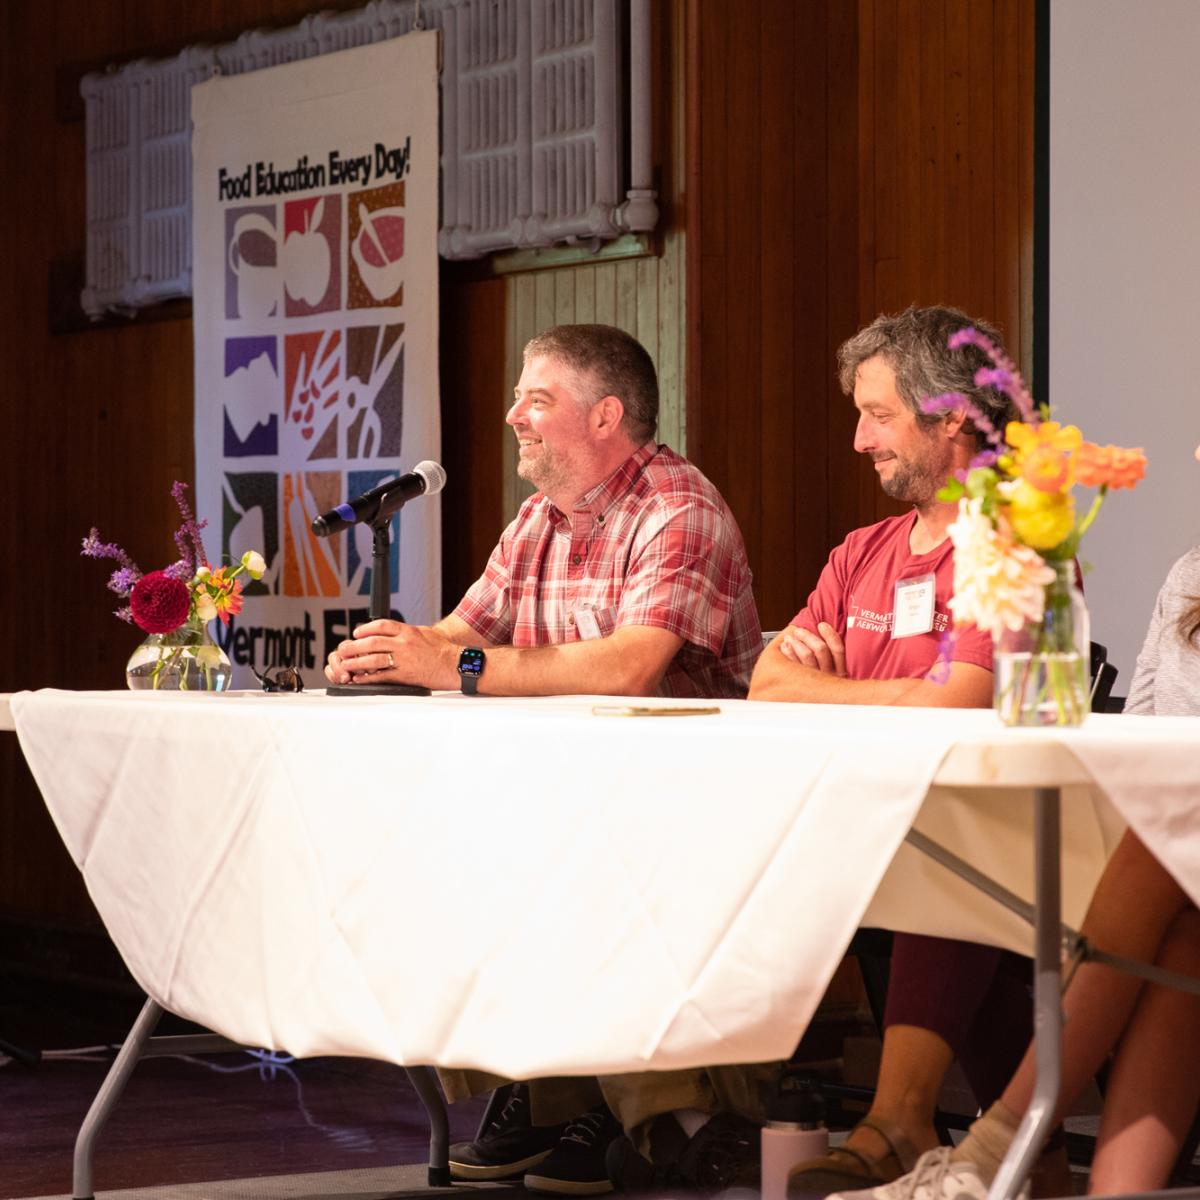 Scott Fay speaks on a cafeteria panel during the 2022 Northeast Farm to School Institute Retreat at Shelburne Farms.